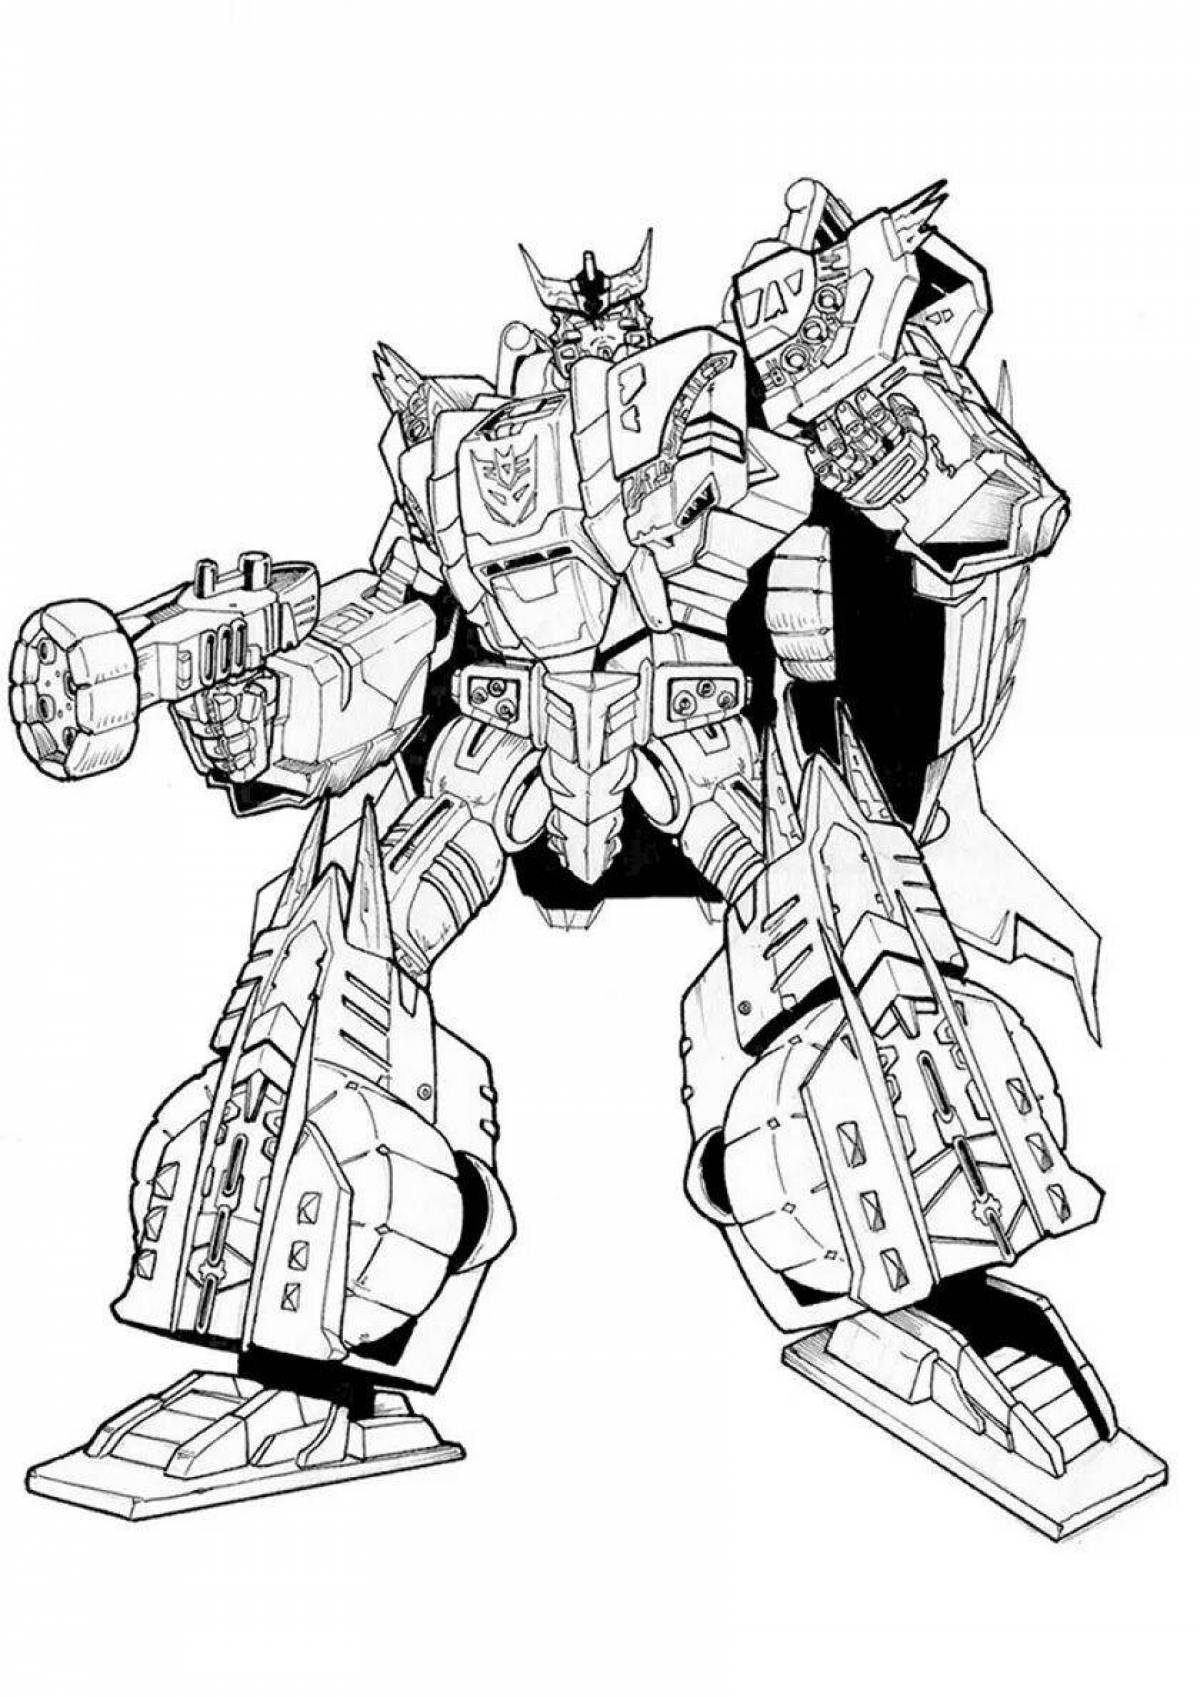 Megatron coloring page with bright colors